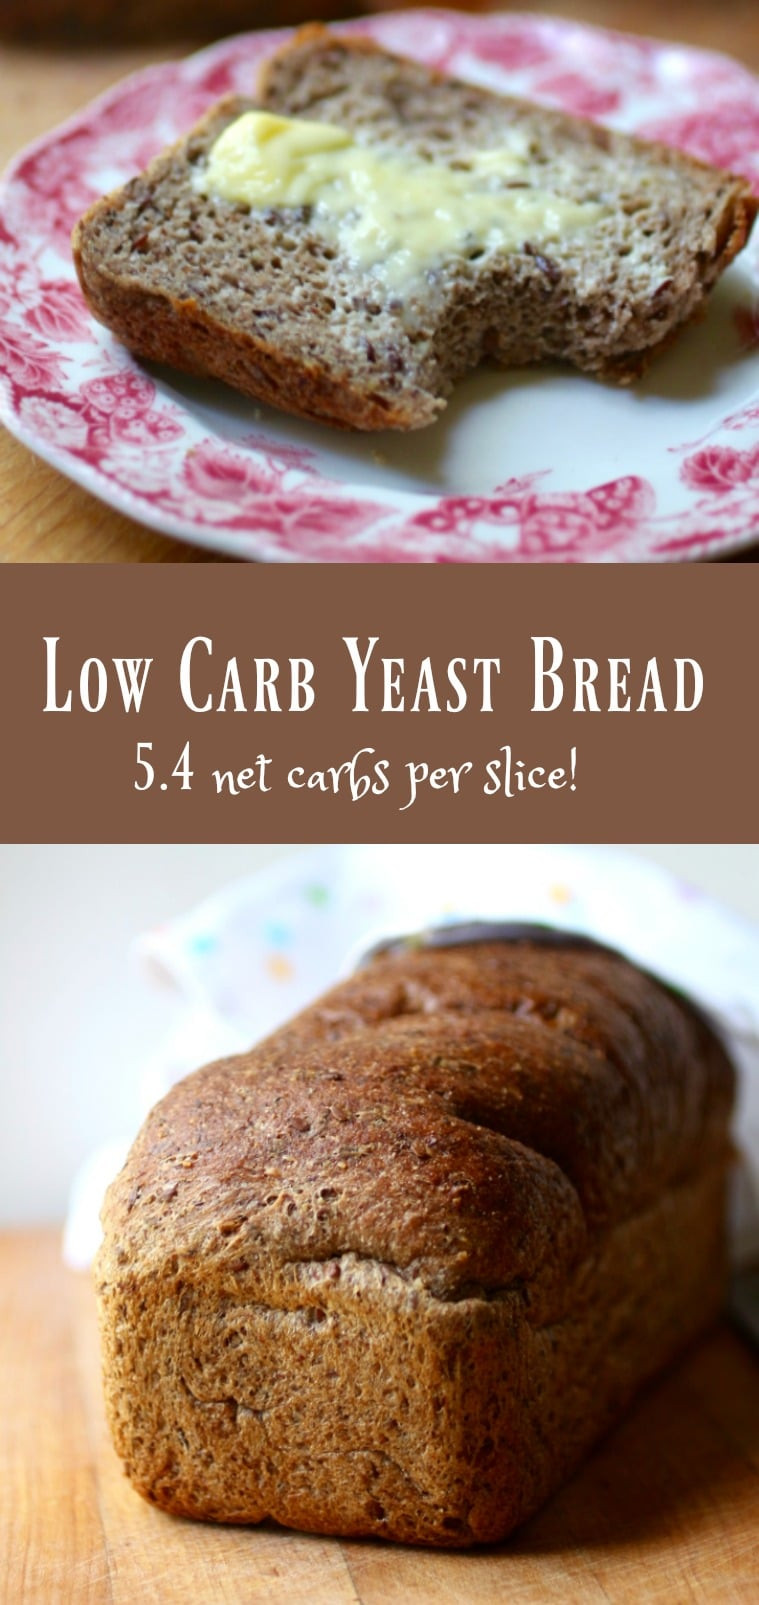 Low Carb Bakery
 Low Carb Yeast Bread Keto Sandwich Bread lowcarb ology